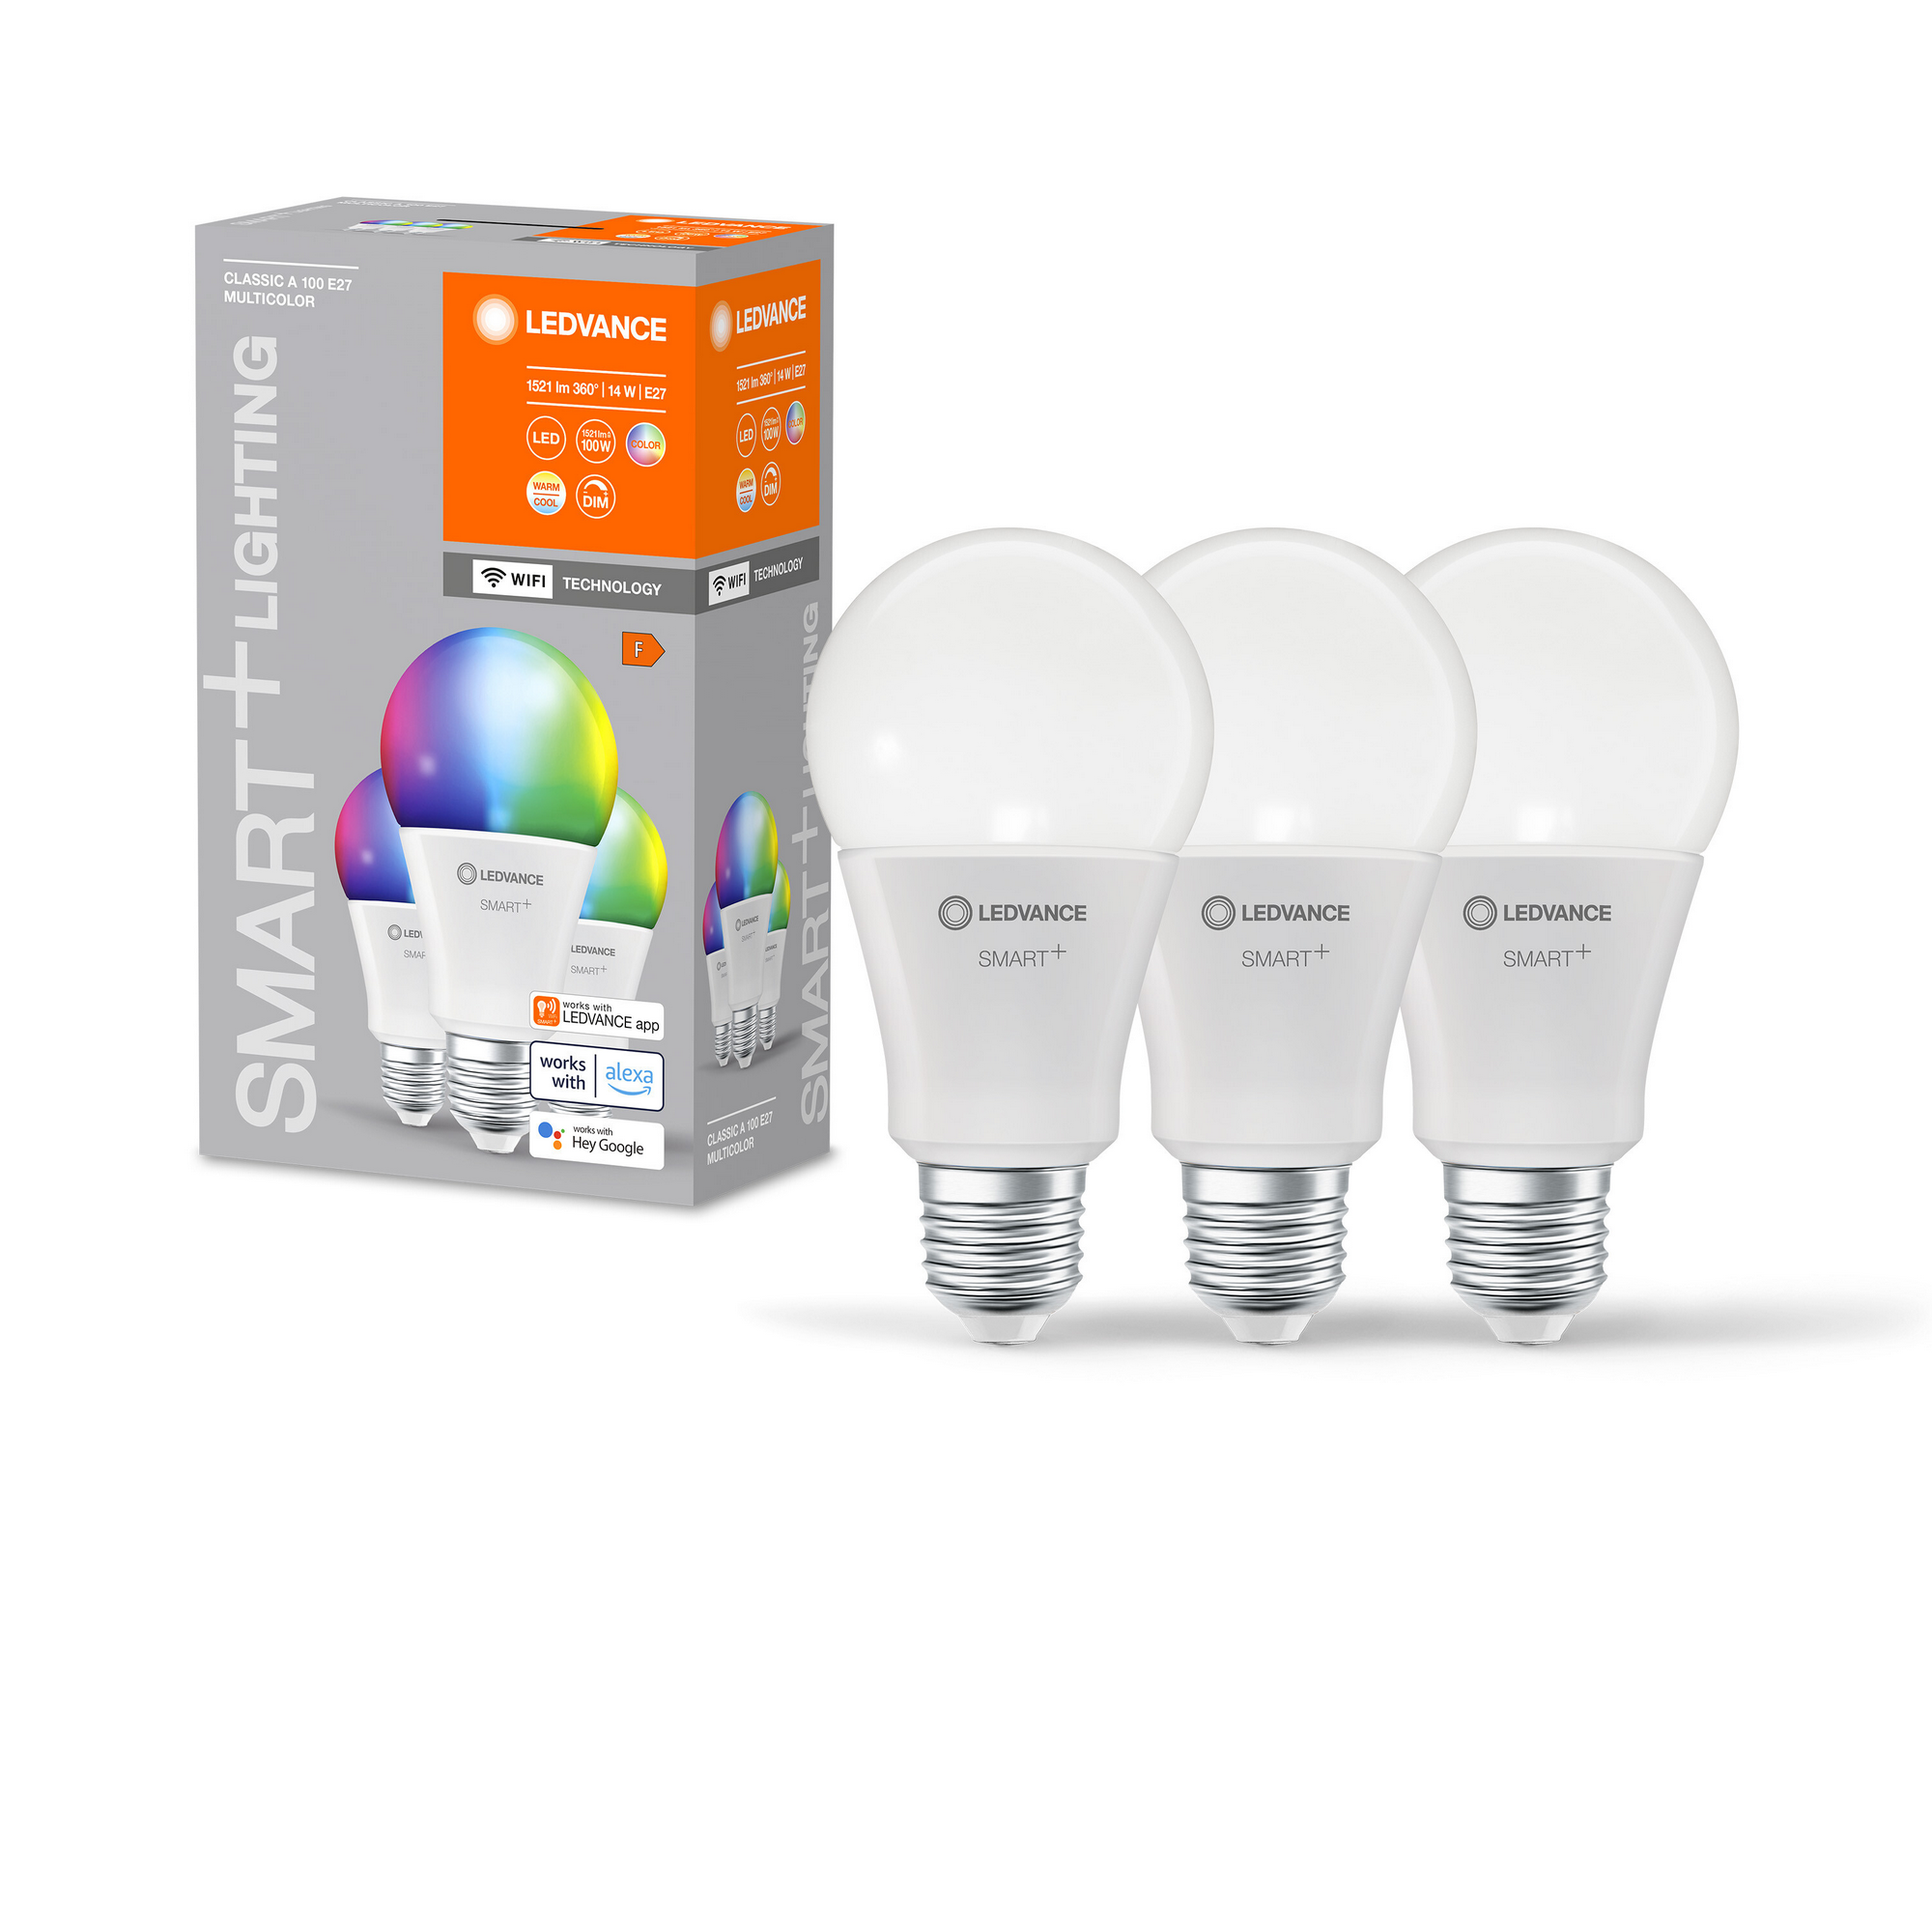 LED-Lampe 'Smart+ WiFi CLA' RGBW 14 W E27 1521 lm, dimmbar 3er-Pack + product picture